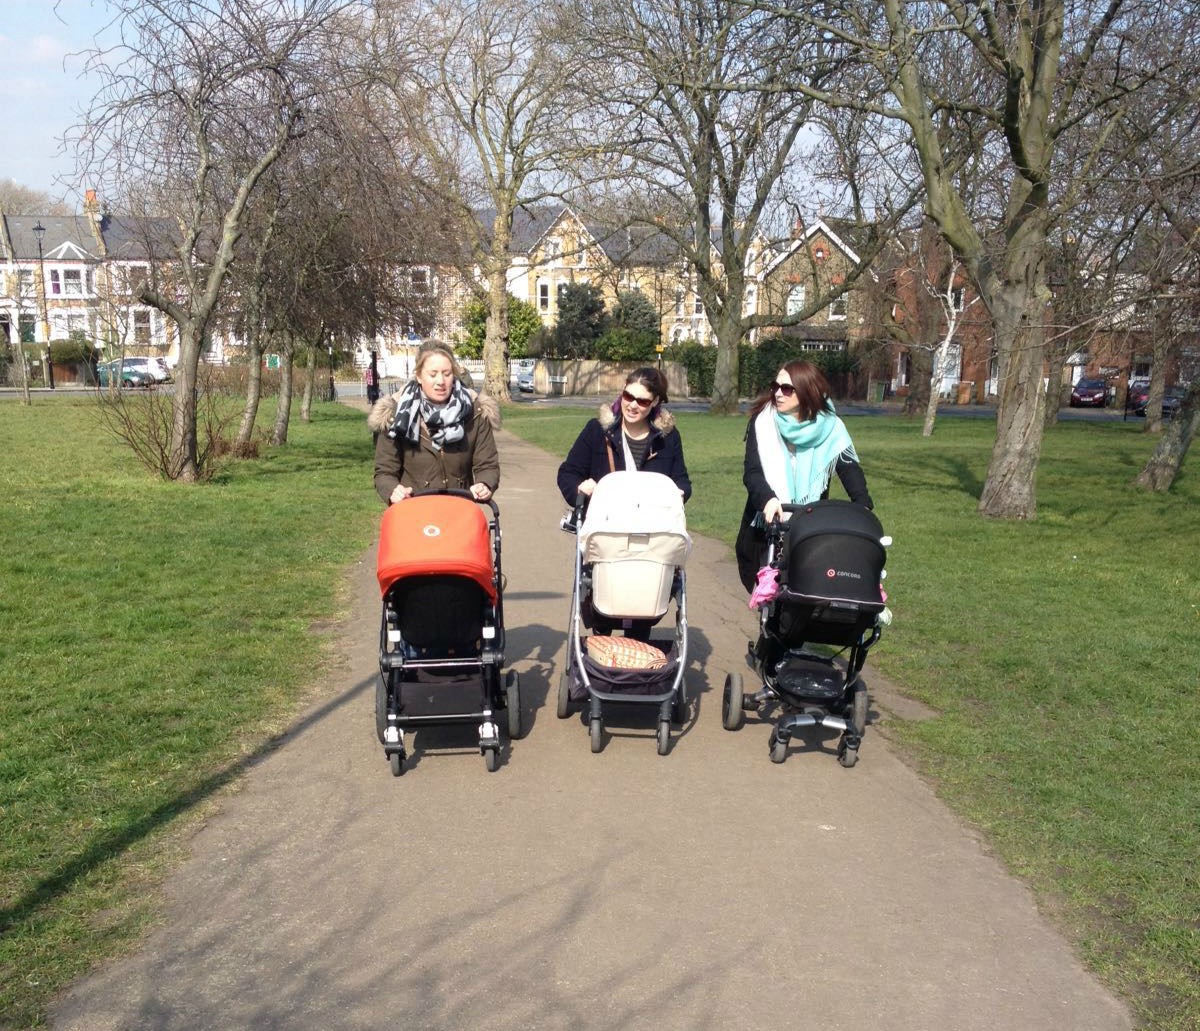 Pushing buggy in the park